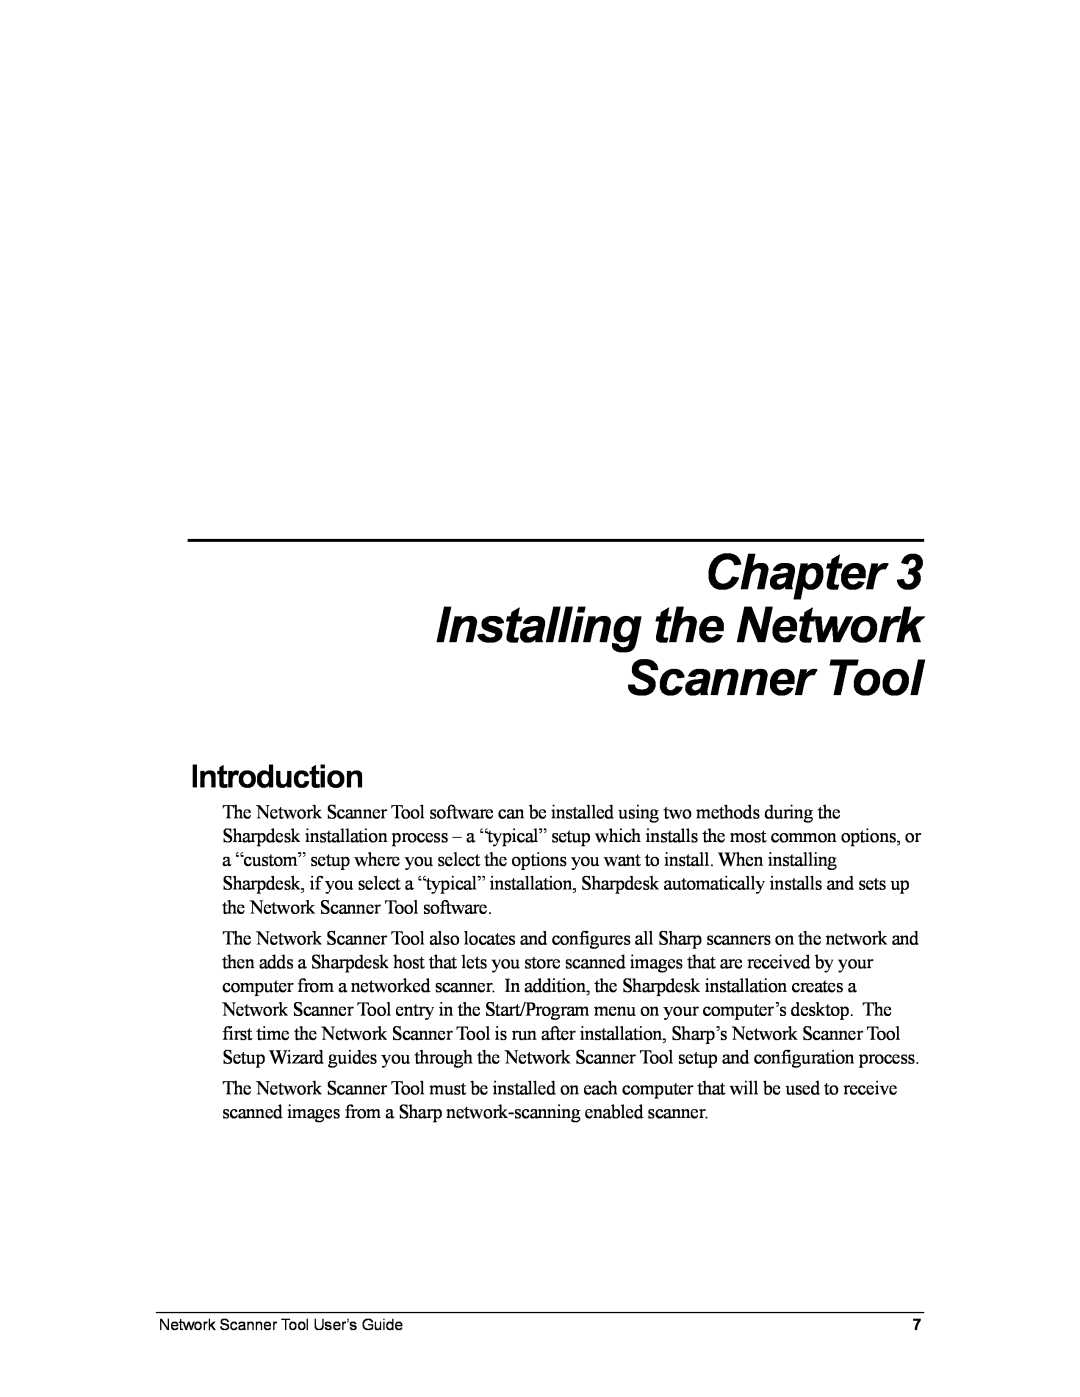 Sharp R3.1 manual Chapter Installing the Network Scanner Tool, Introduction 